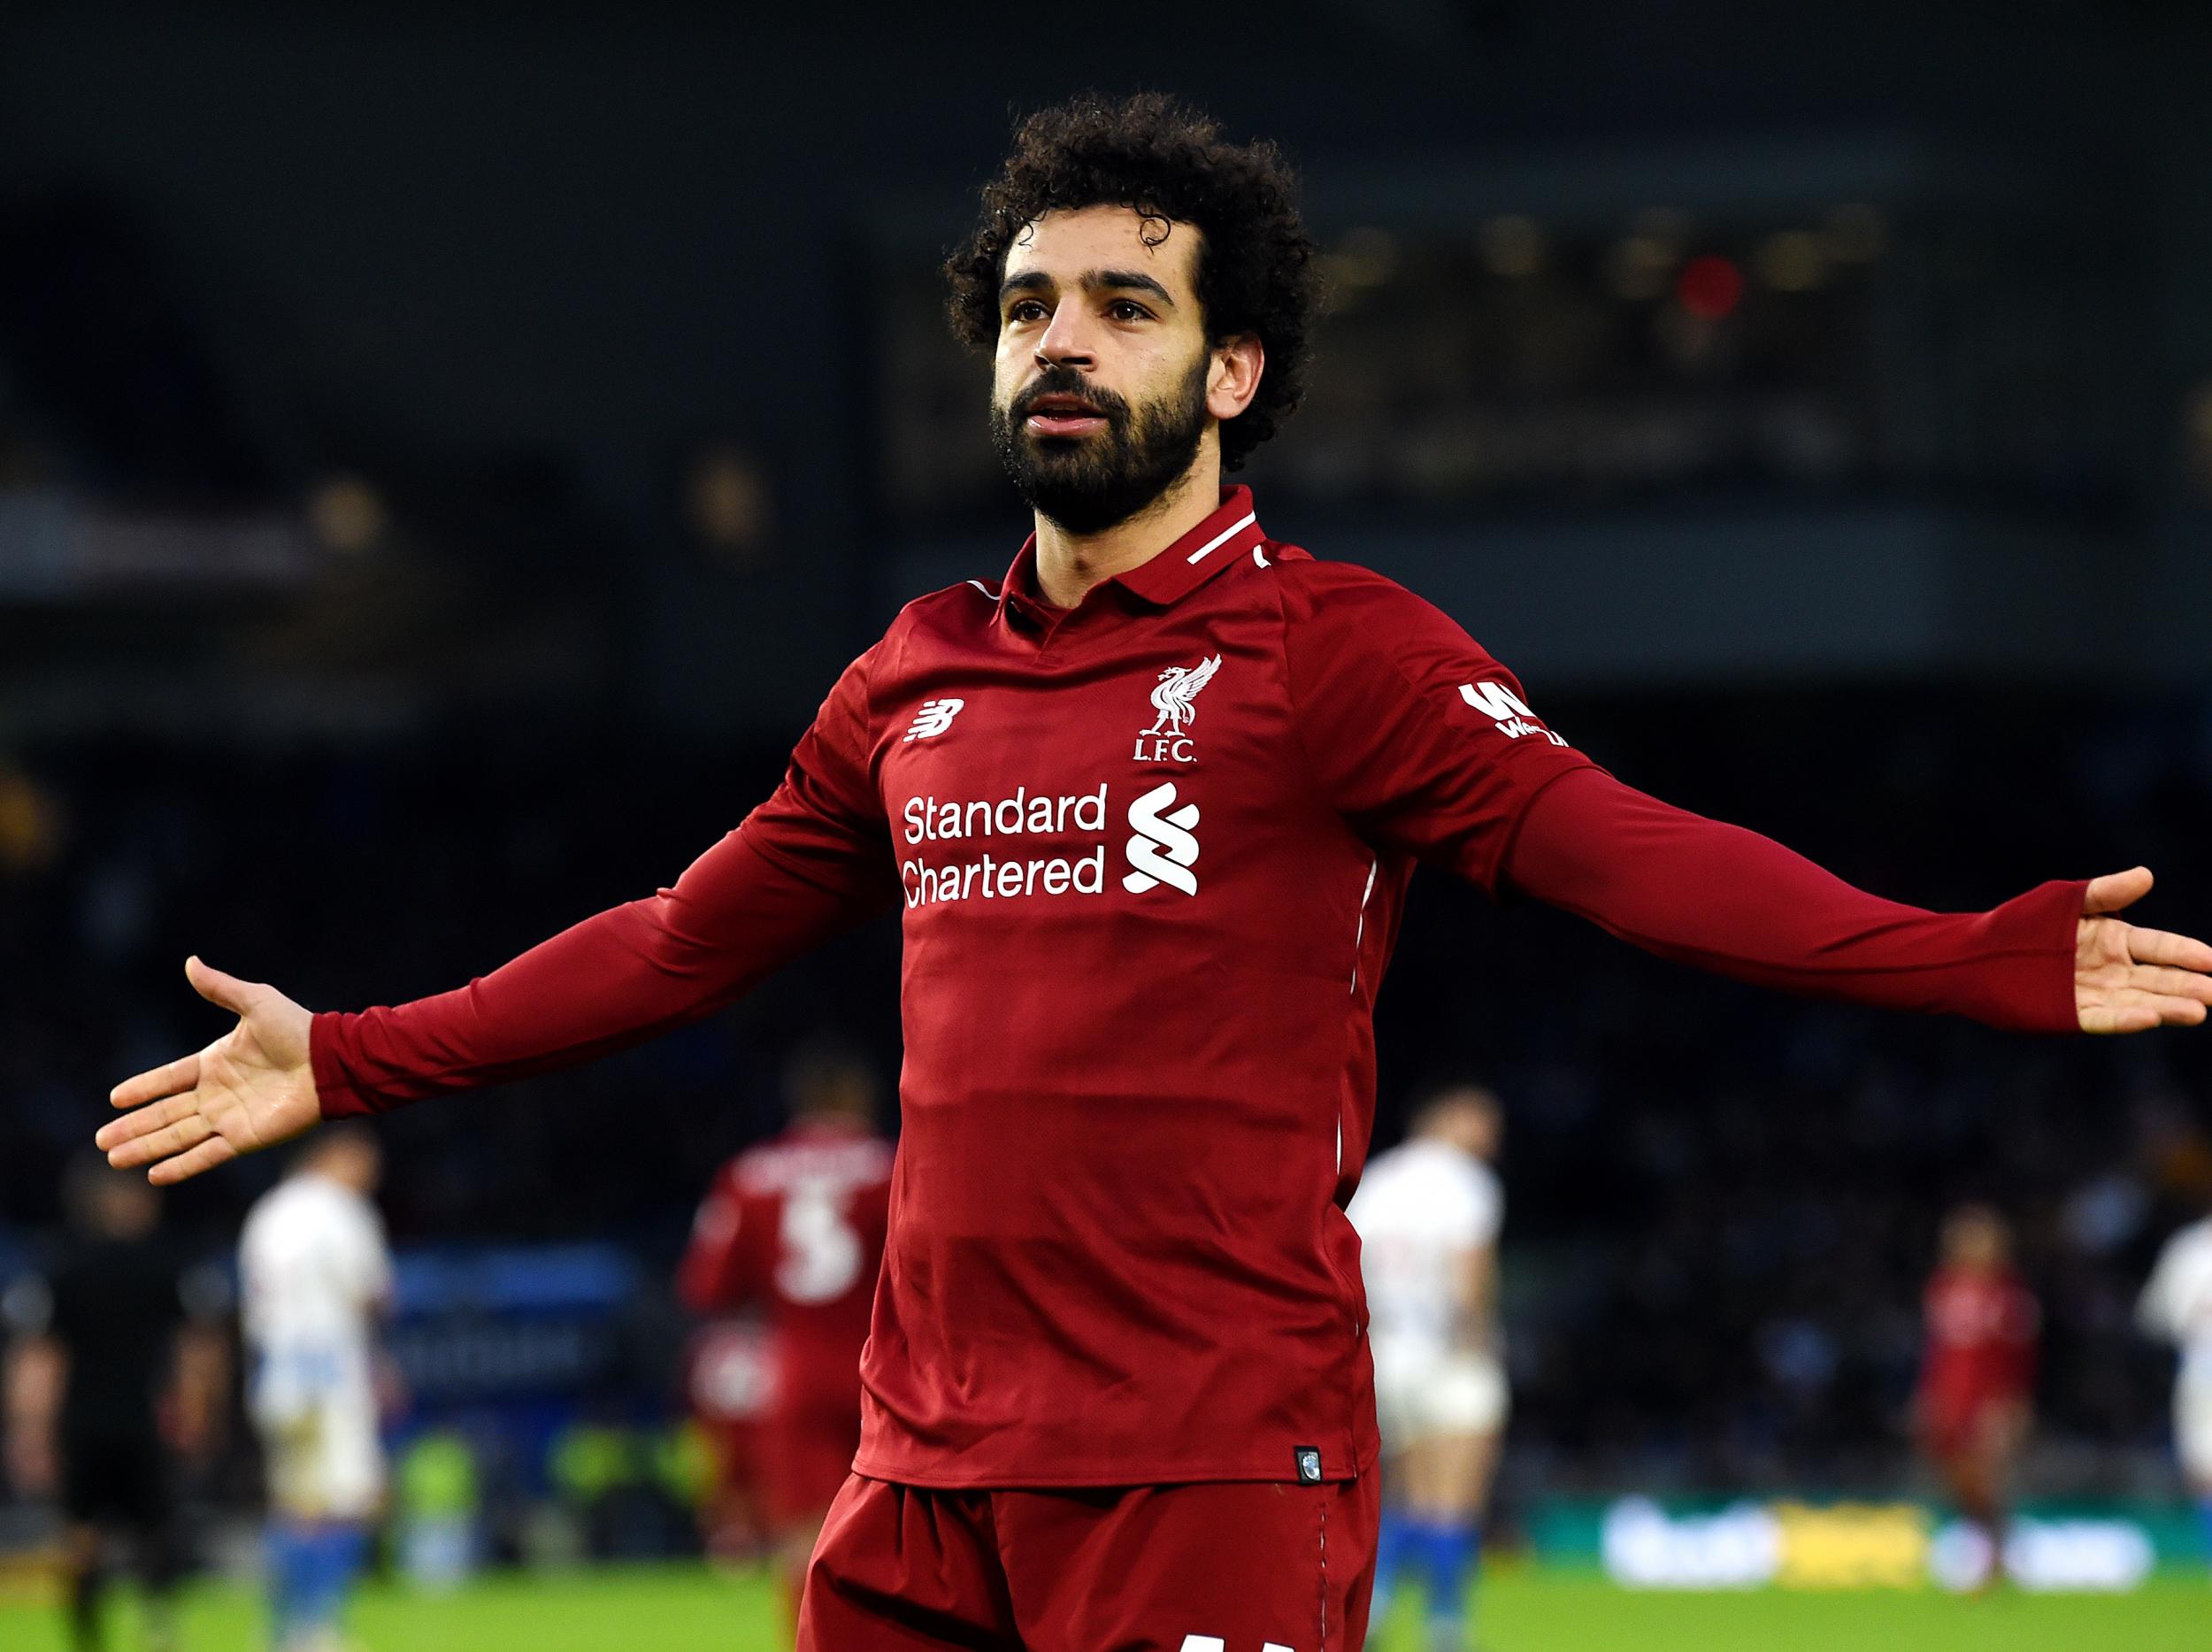 Liverpool Premier League fixtures 2019/20 revealed: Full list for new season | The ...